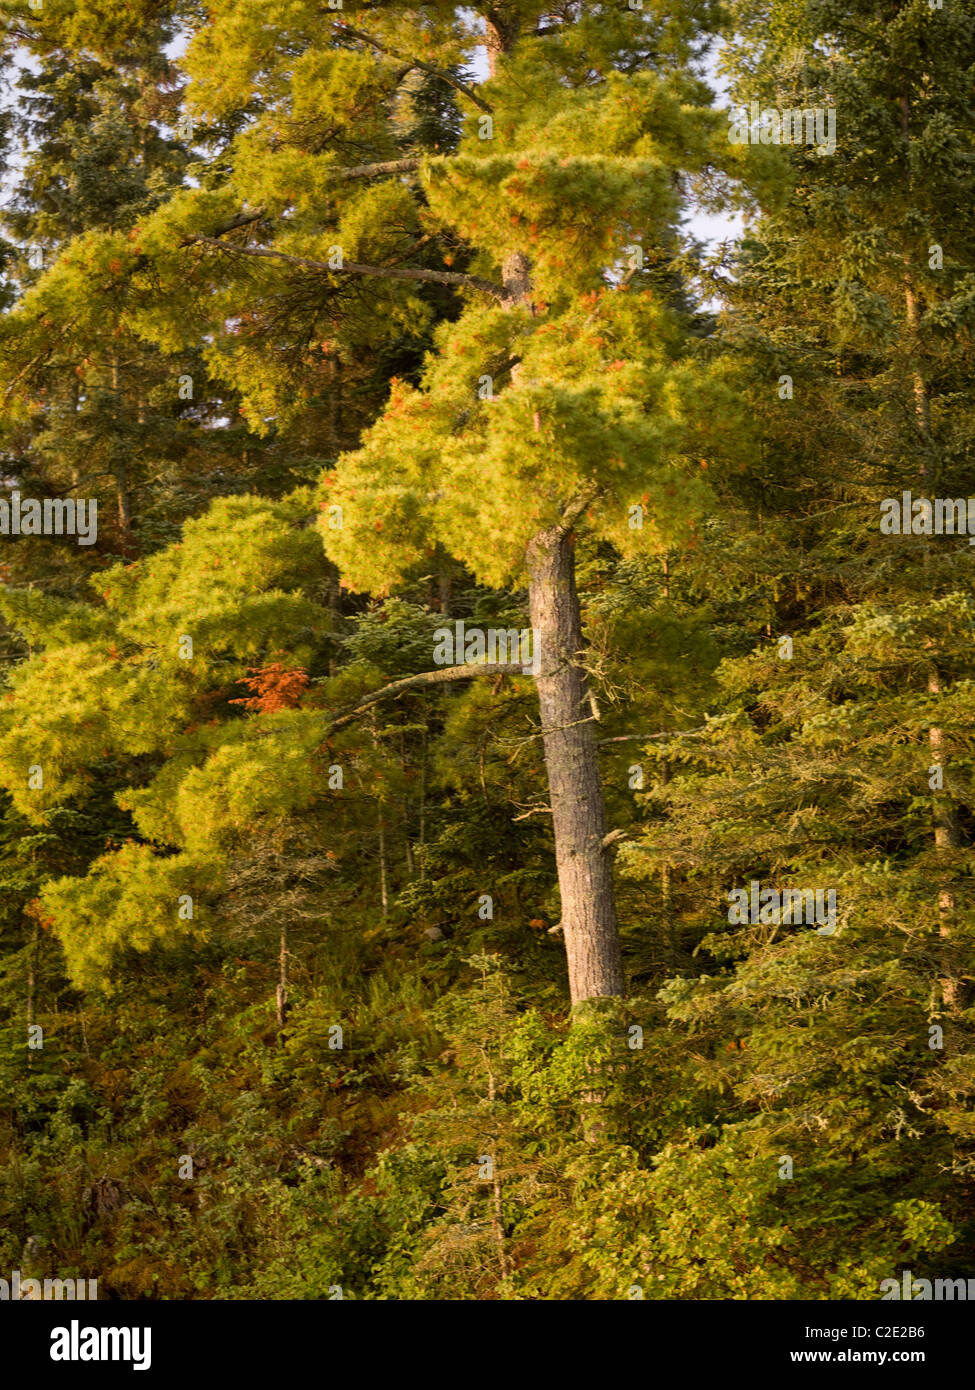 Lake Of The Woods, Ontario, Canada; Foliage On River Bank Stock Photo